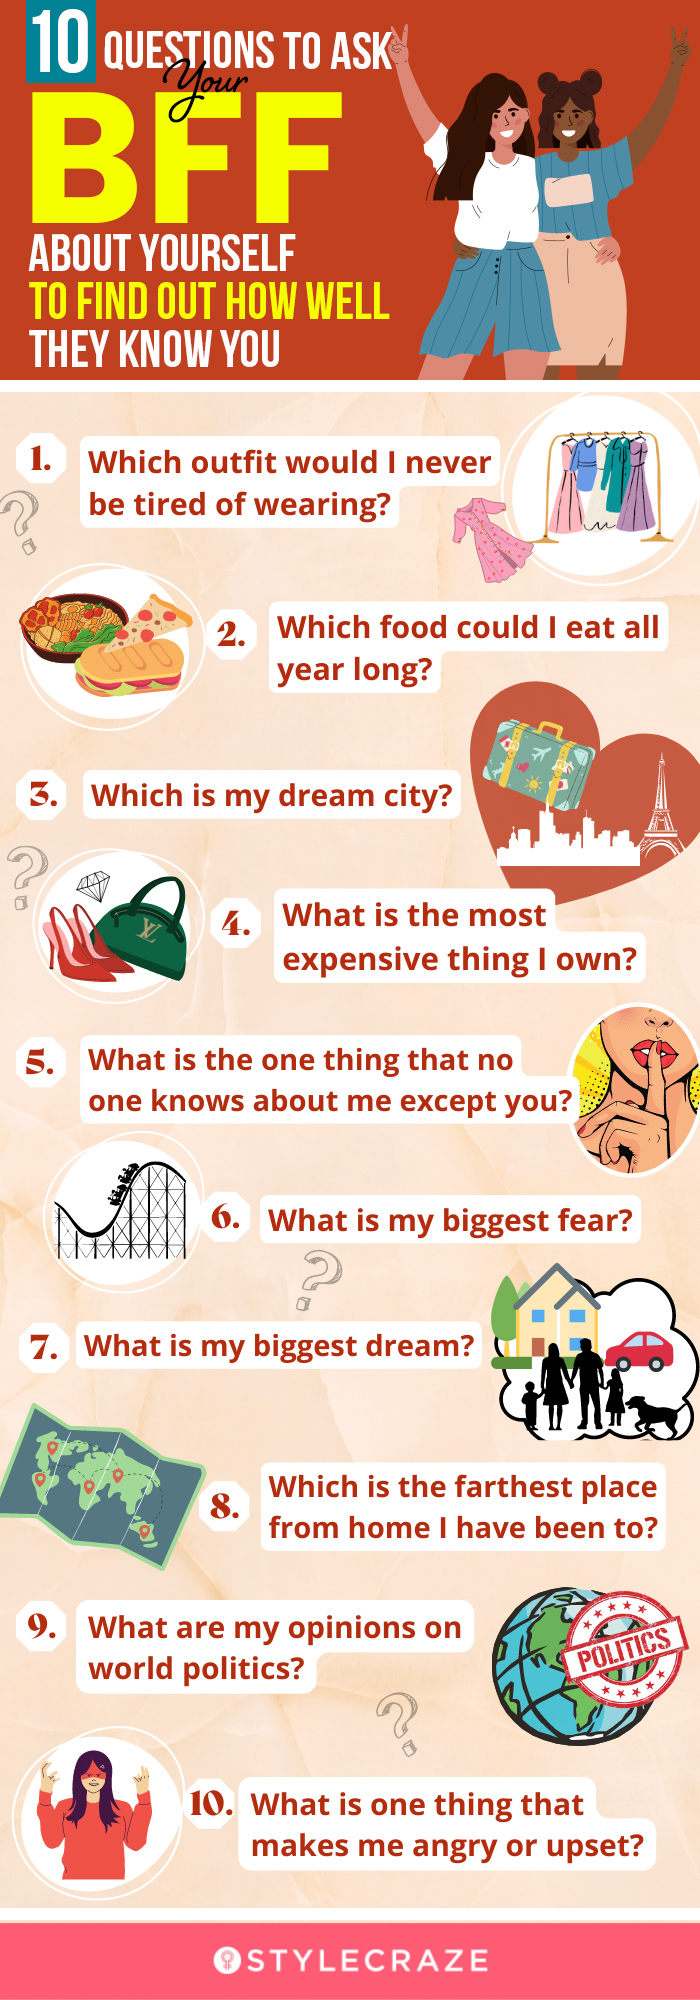 10 questions to ask your bff about yourself to find out how well they know you (infographic)